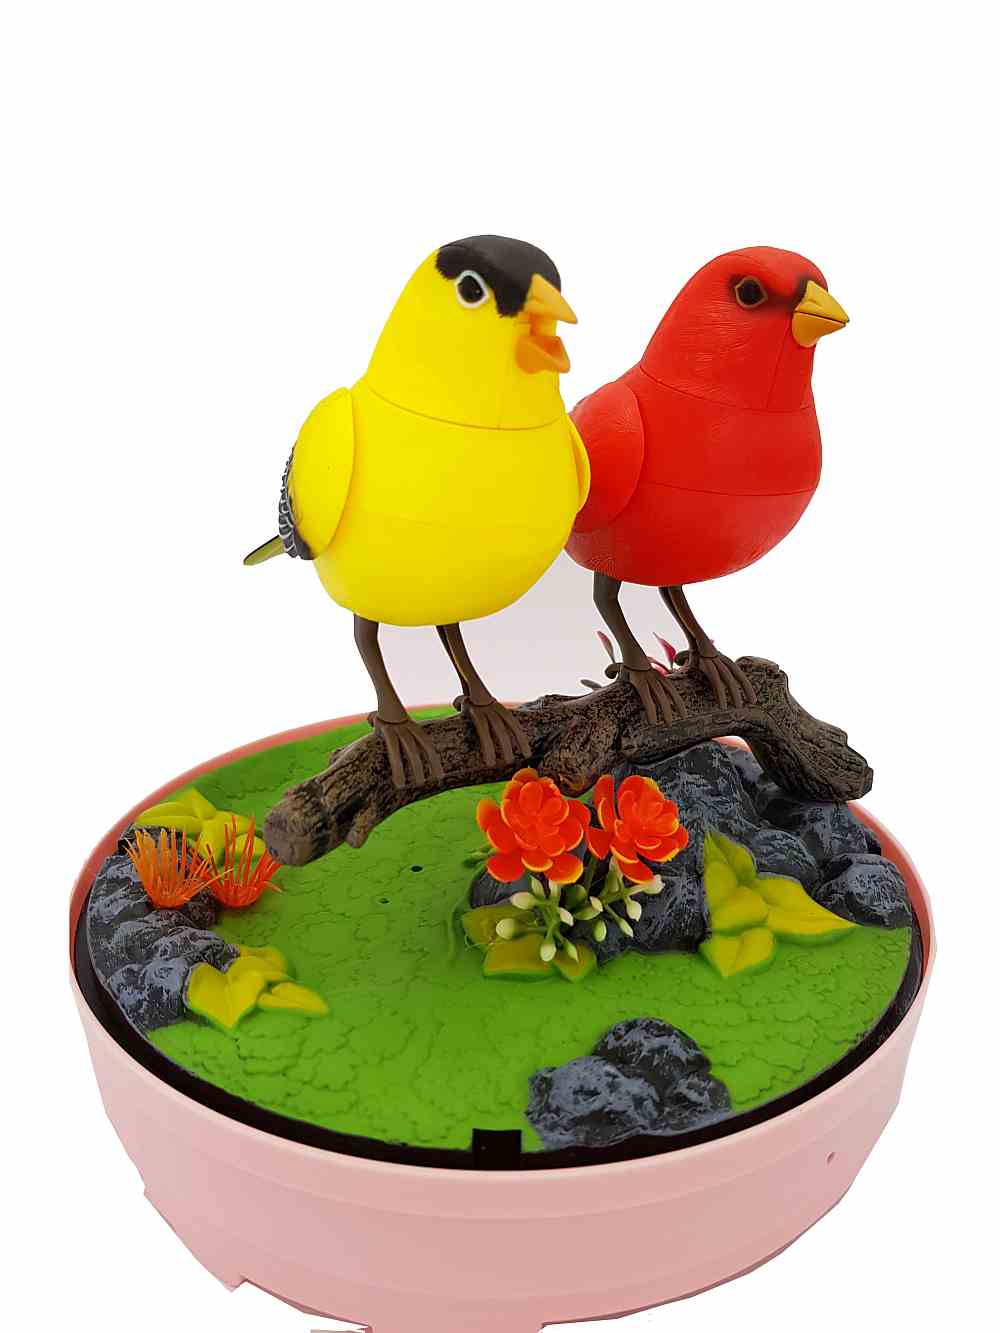 The Ensemble Bird Light Function Two Red and Yellow Birds in Cage Girl Presents